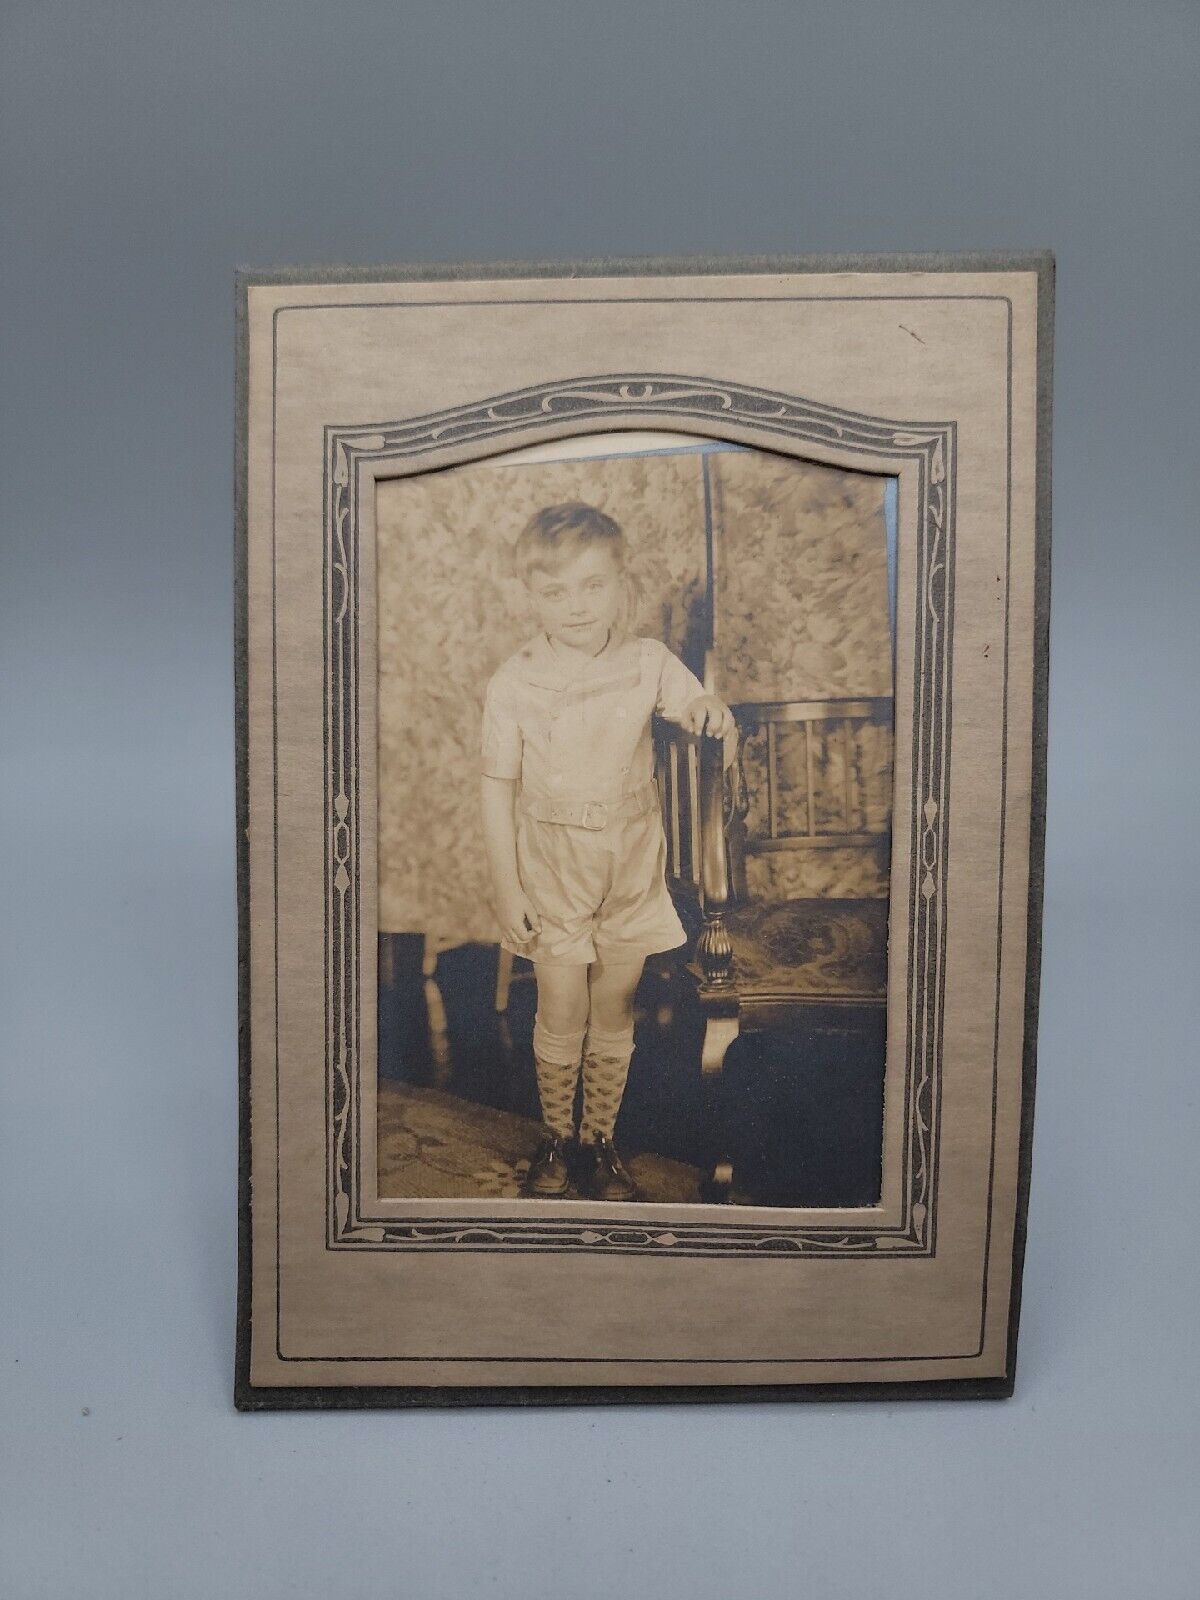 Antique Photograph Little Boy Shorts Socks Pulled Up Posing Leaning On Chair